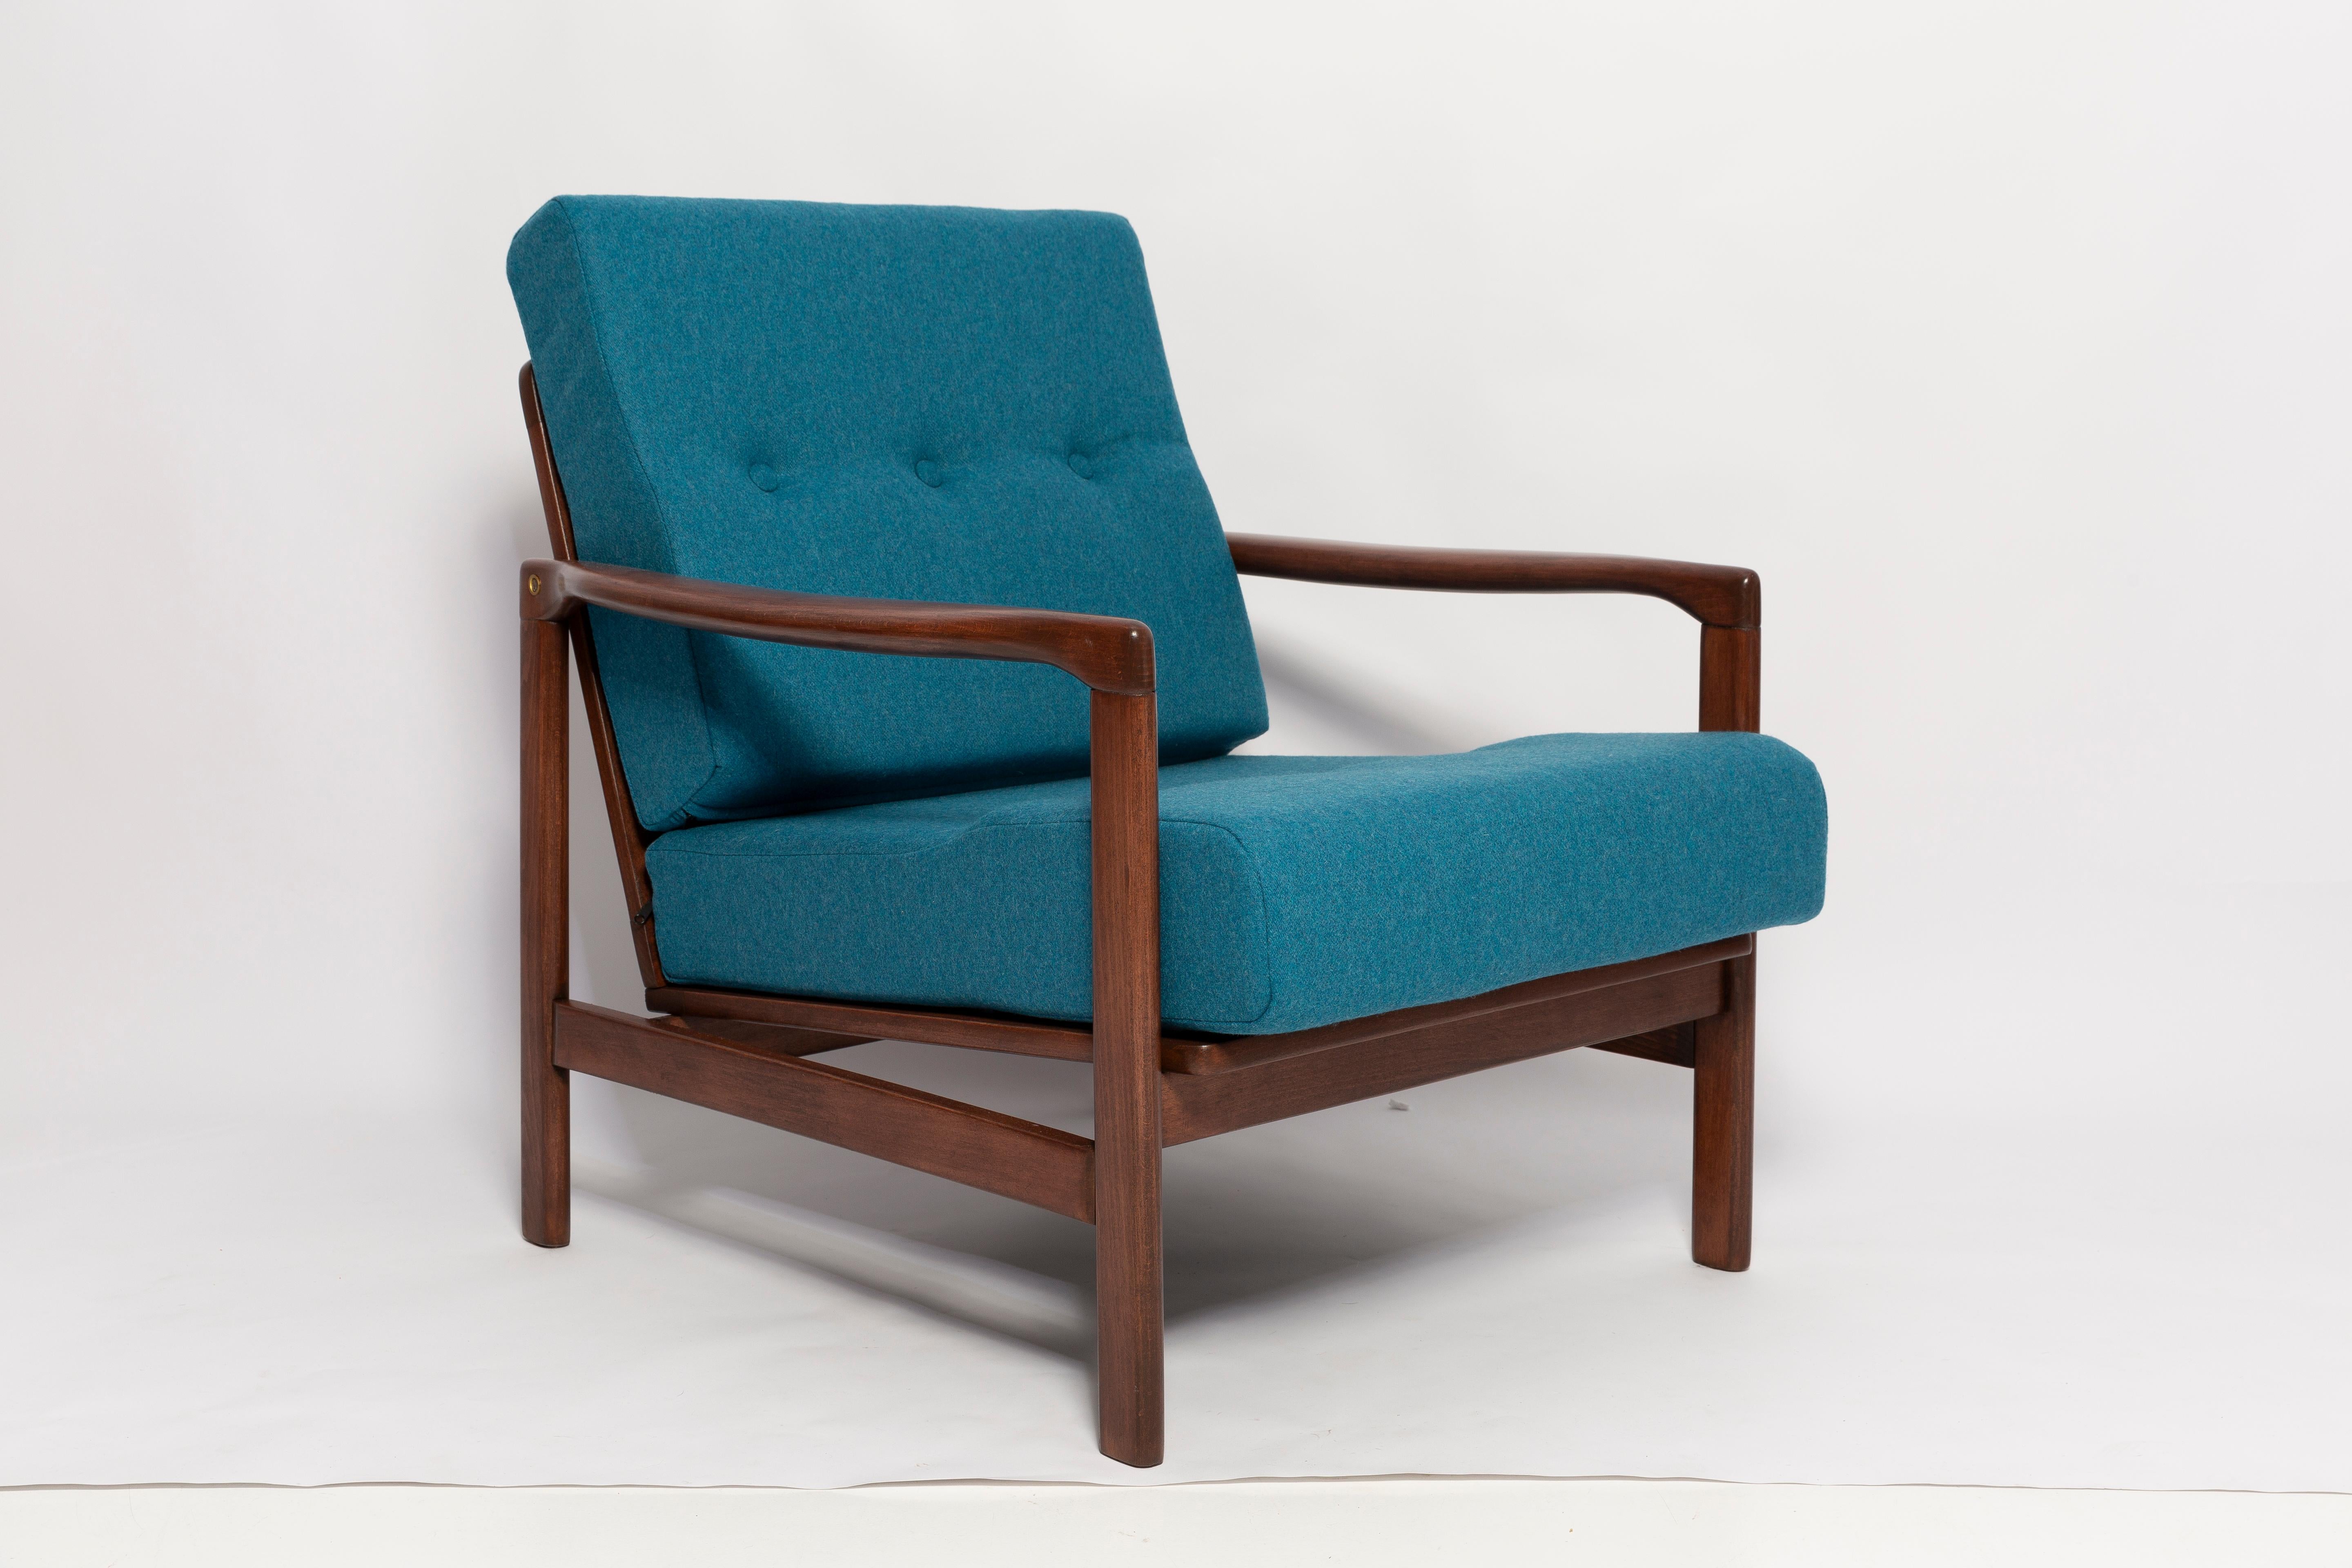 Pair of Mid Century Armchairs and Coffee Table, Zenon Baczyk, Europe, 1960s For Sale 5